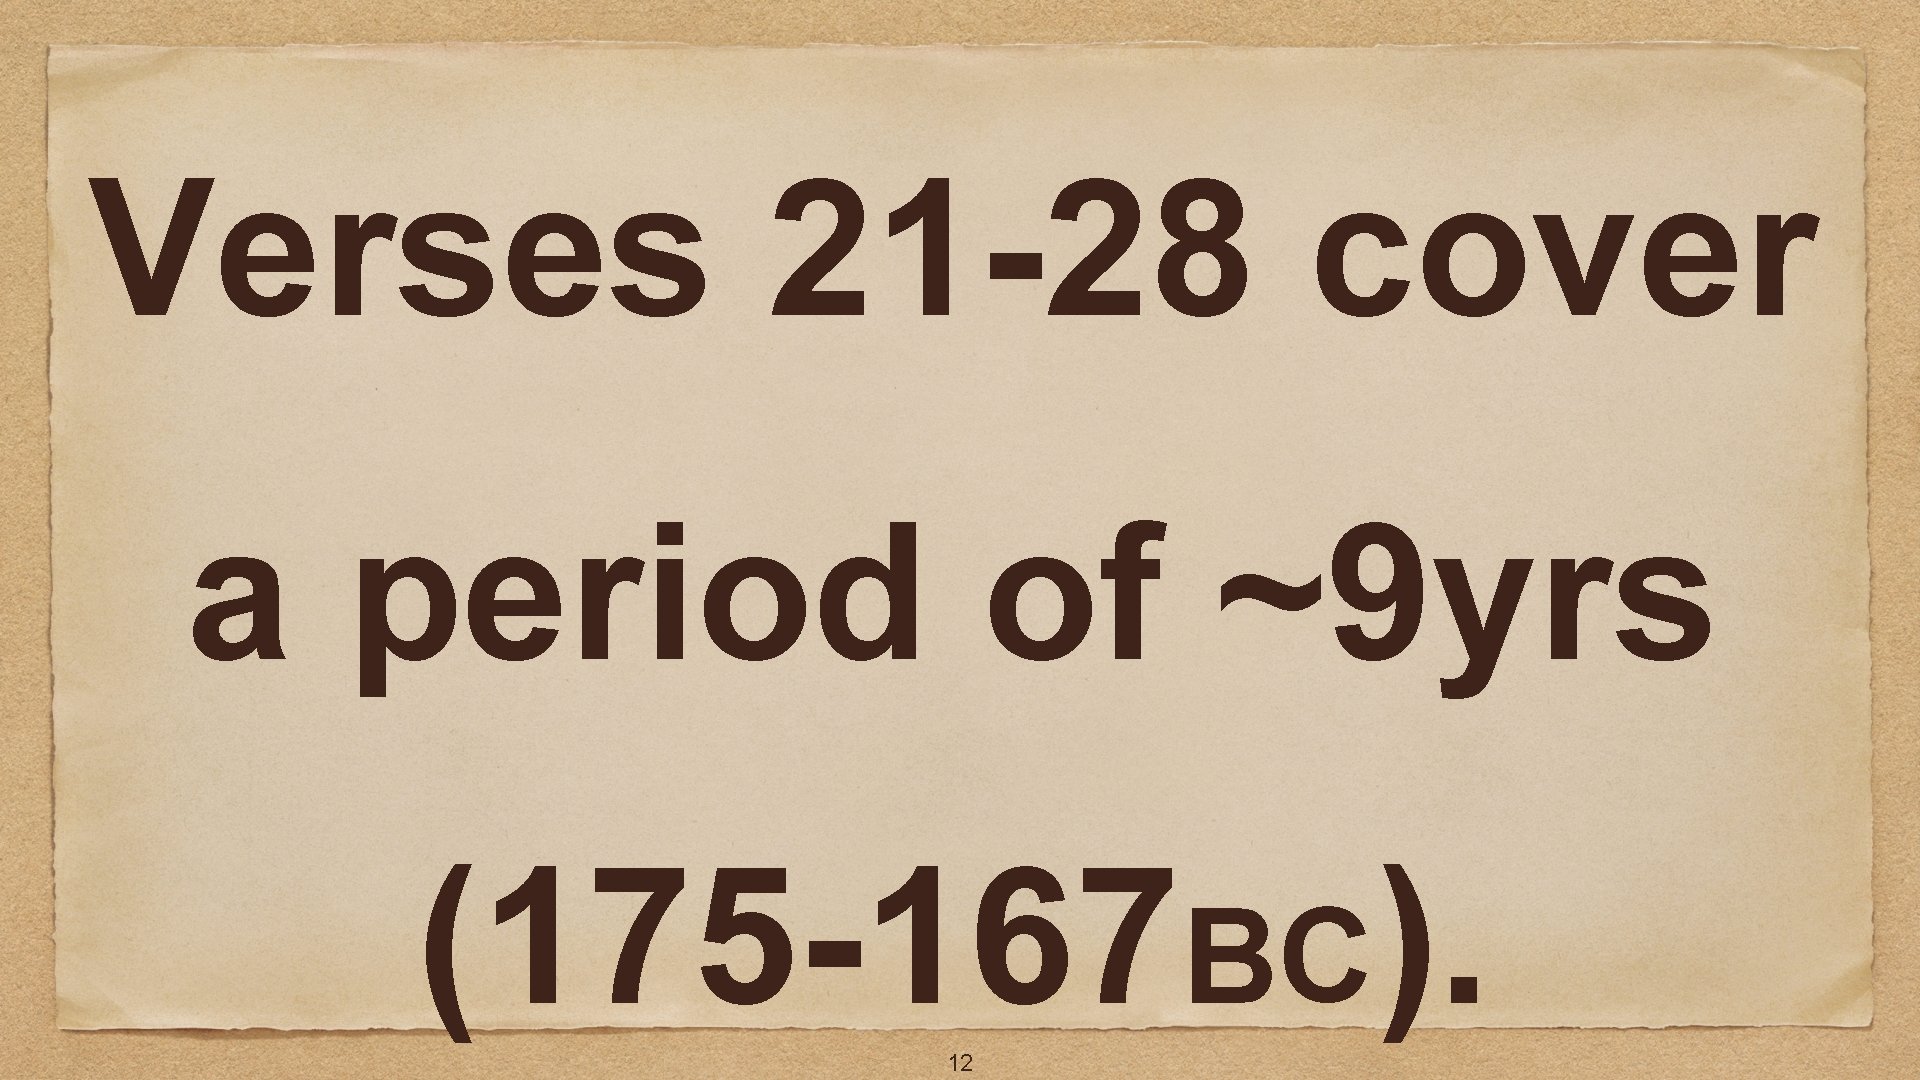 Verses 21 -28 cover a period of ~9 yrs (175 -167 BC). 12 